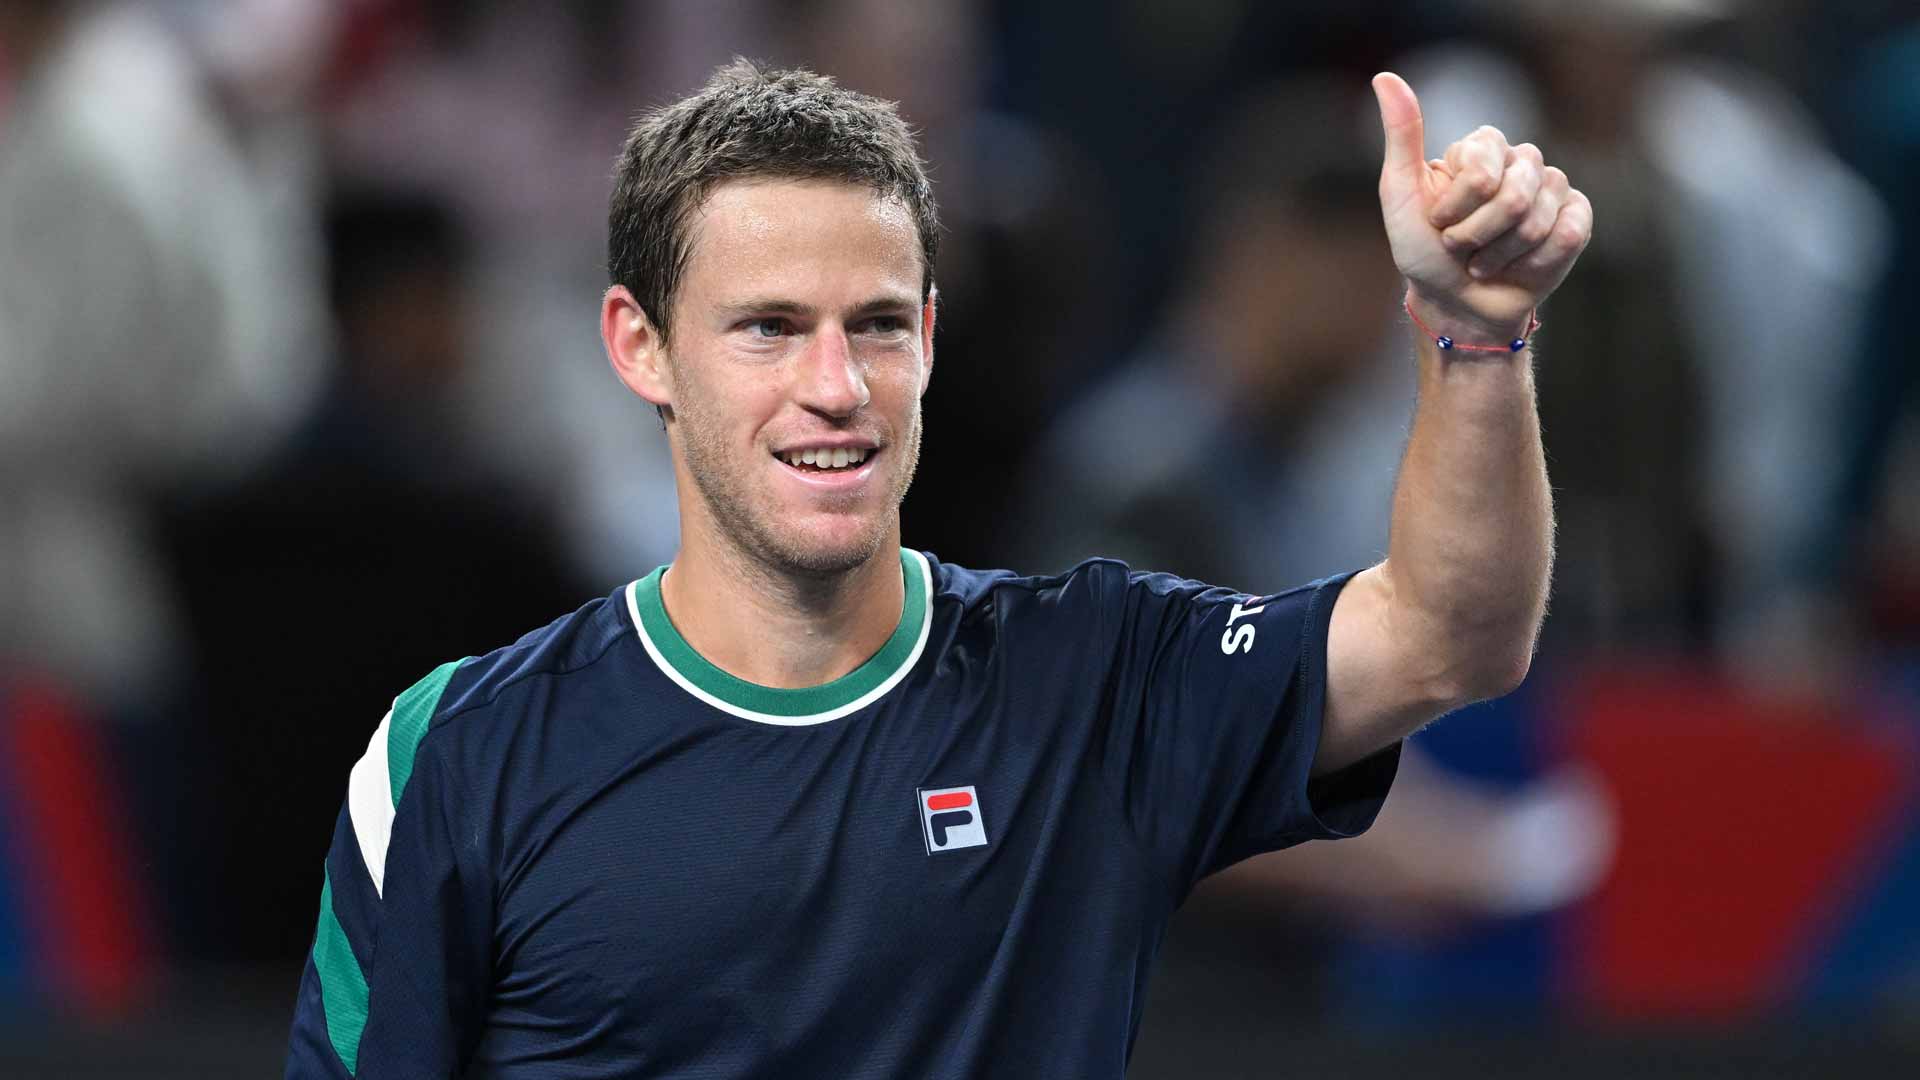 Diego Schwartzman climbed as high as No. 8 in the PIF ATP Rankings.